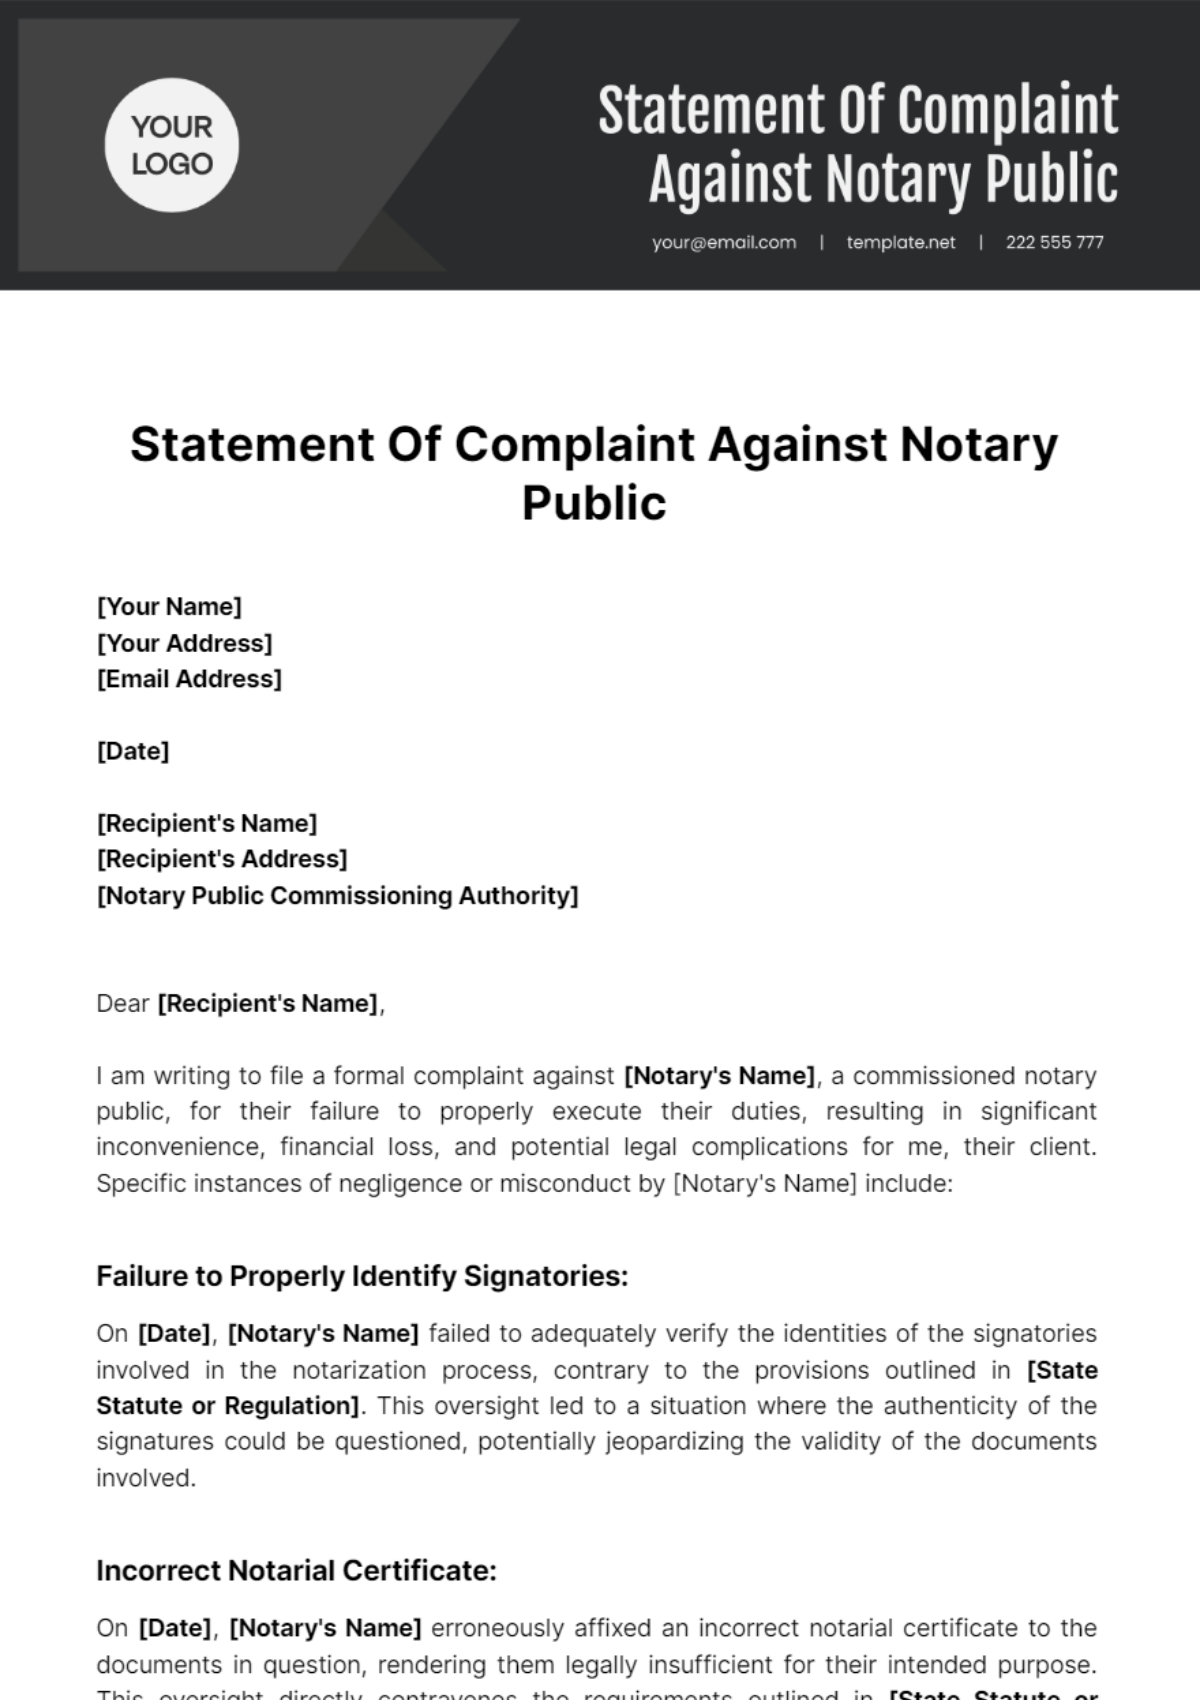 Free Statement Of Complaint Against Notary Public Template